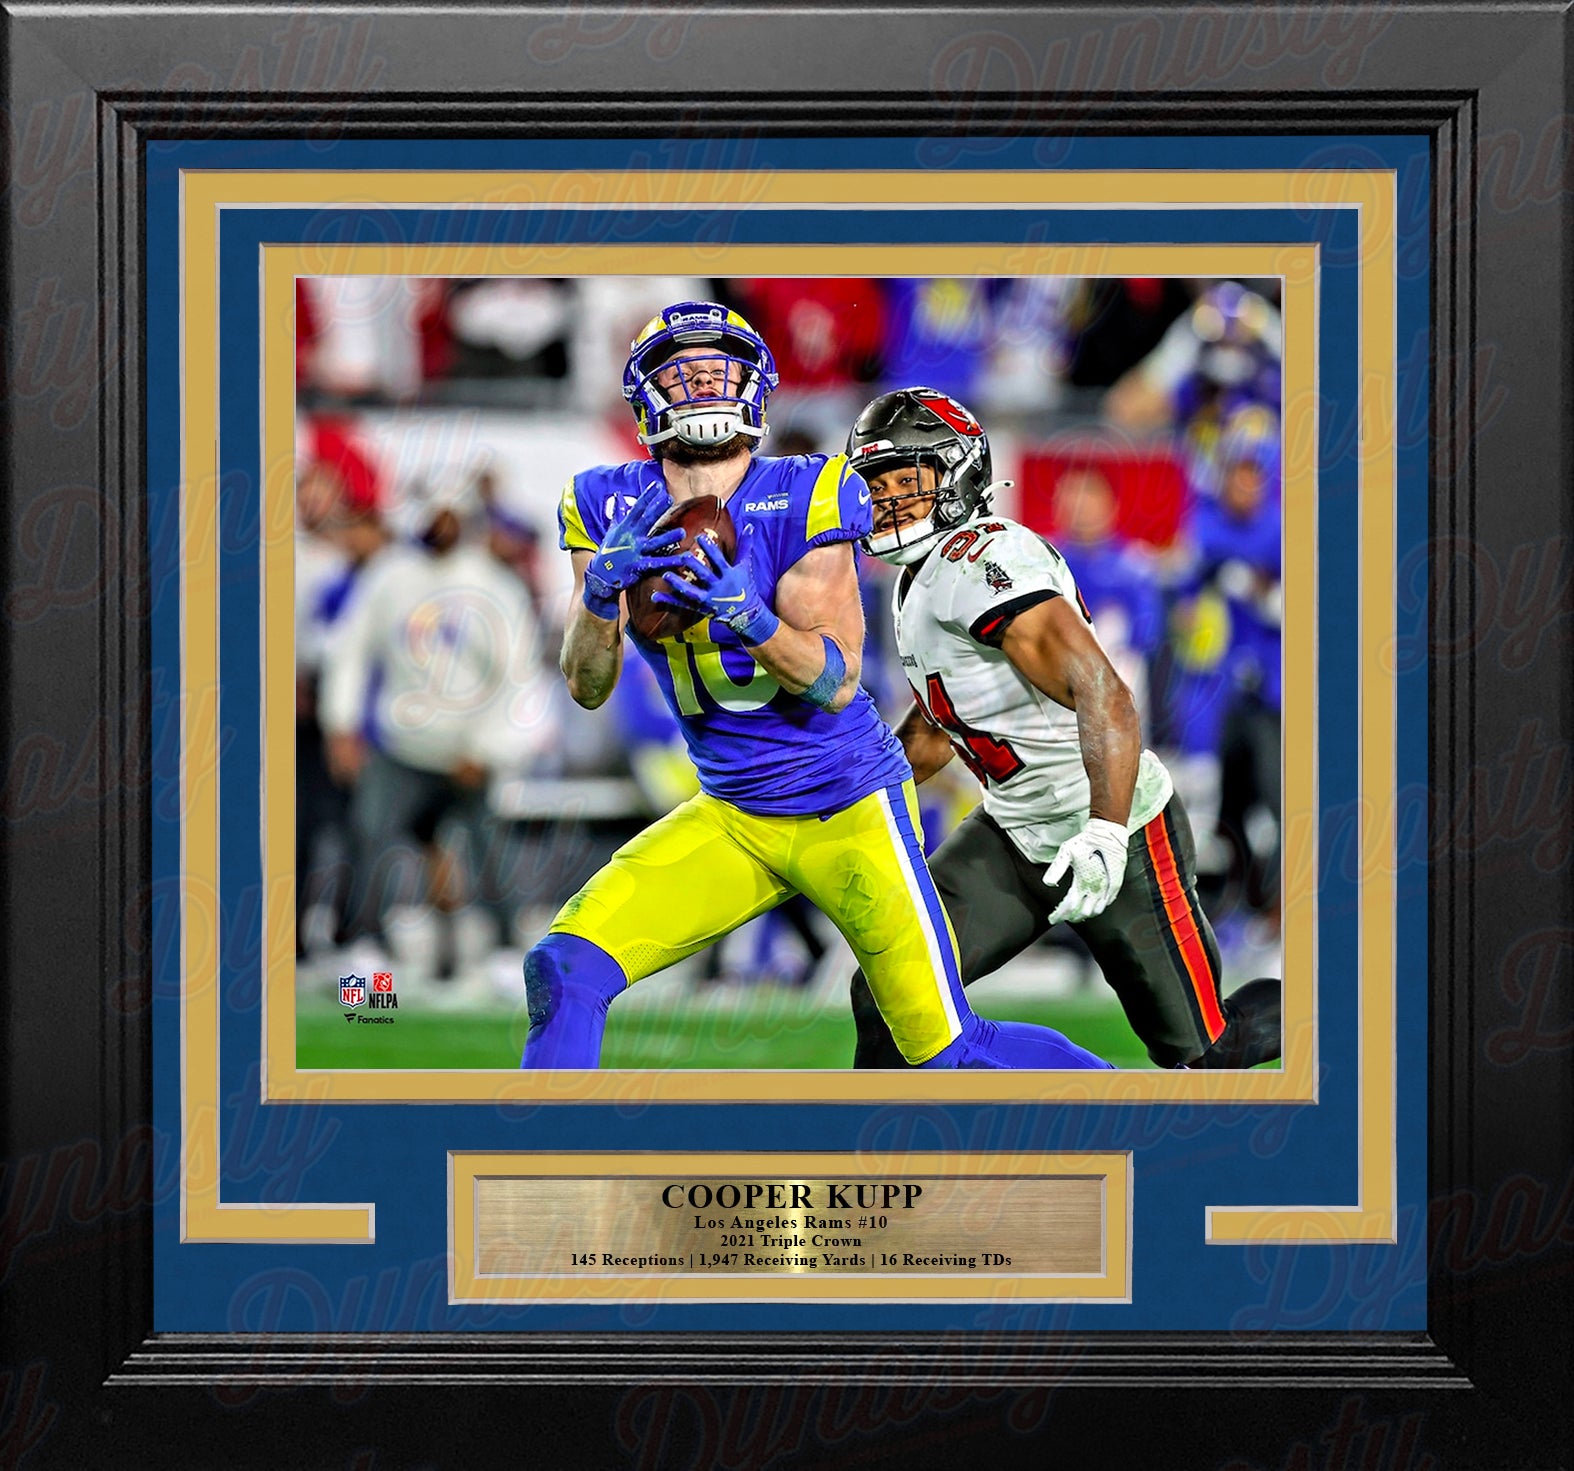 Cooper Kupp Playoff Action Los Angeles Rams 8' x 10' Framed Football Photo